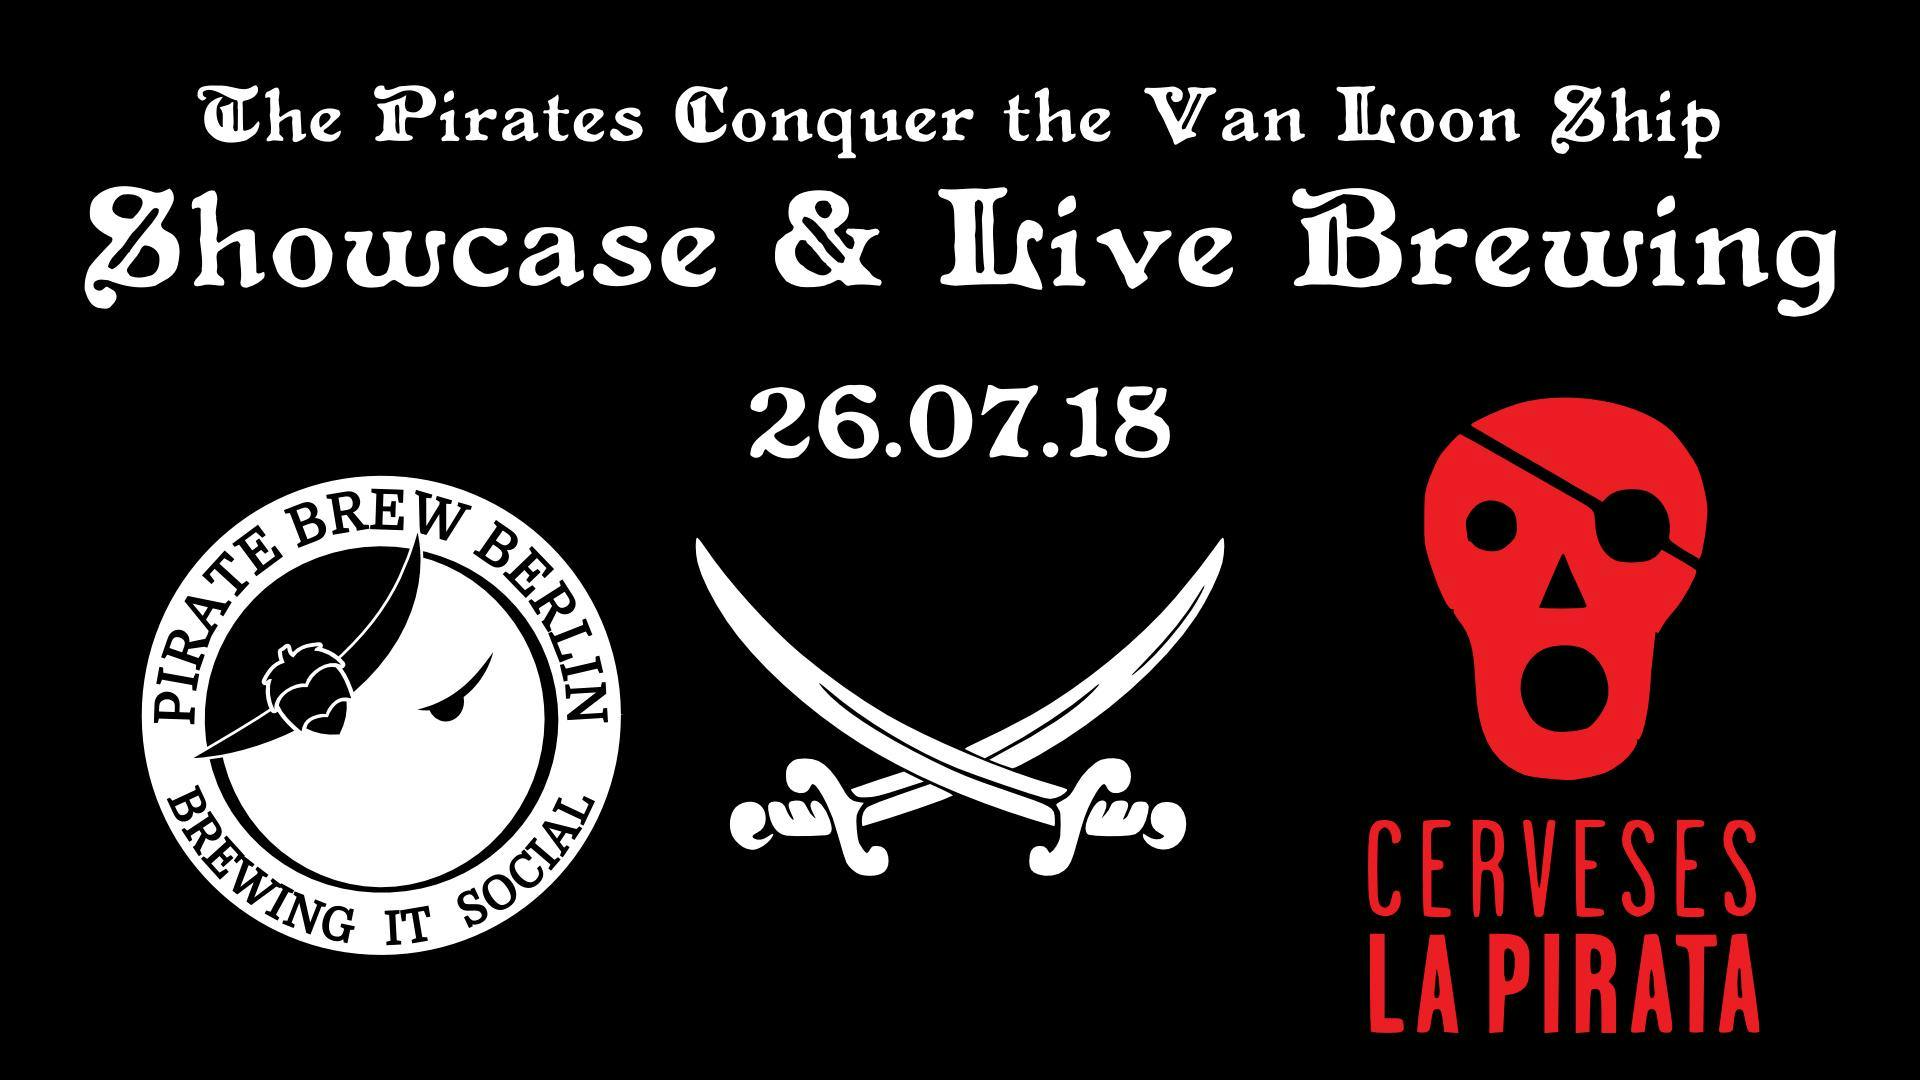 The Pirates are conquering the Van Loon ship - Showcase & Live Brewing